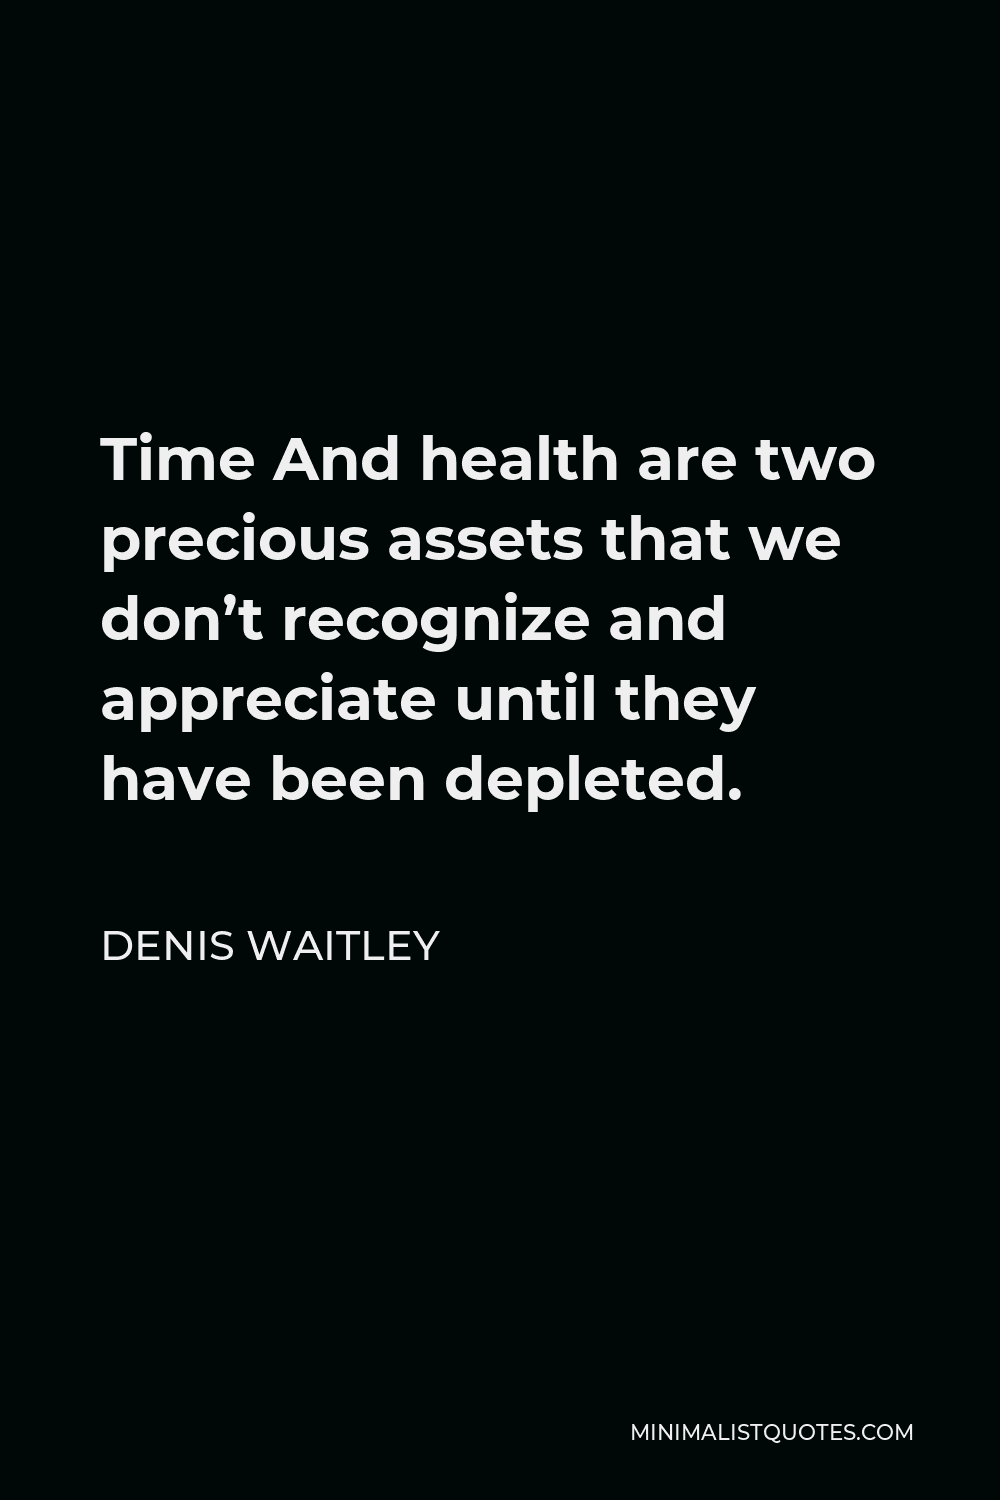 Denis Waitley Quote - Time And health are two precious assets that we don’t recognize and appreciate until they have been depleted.